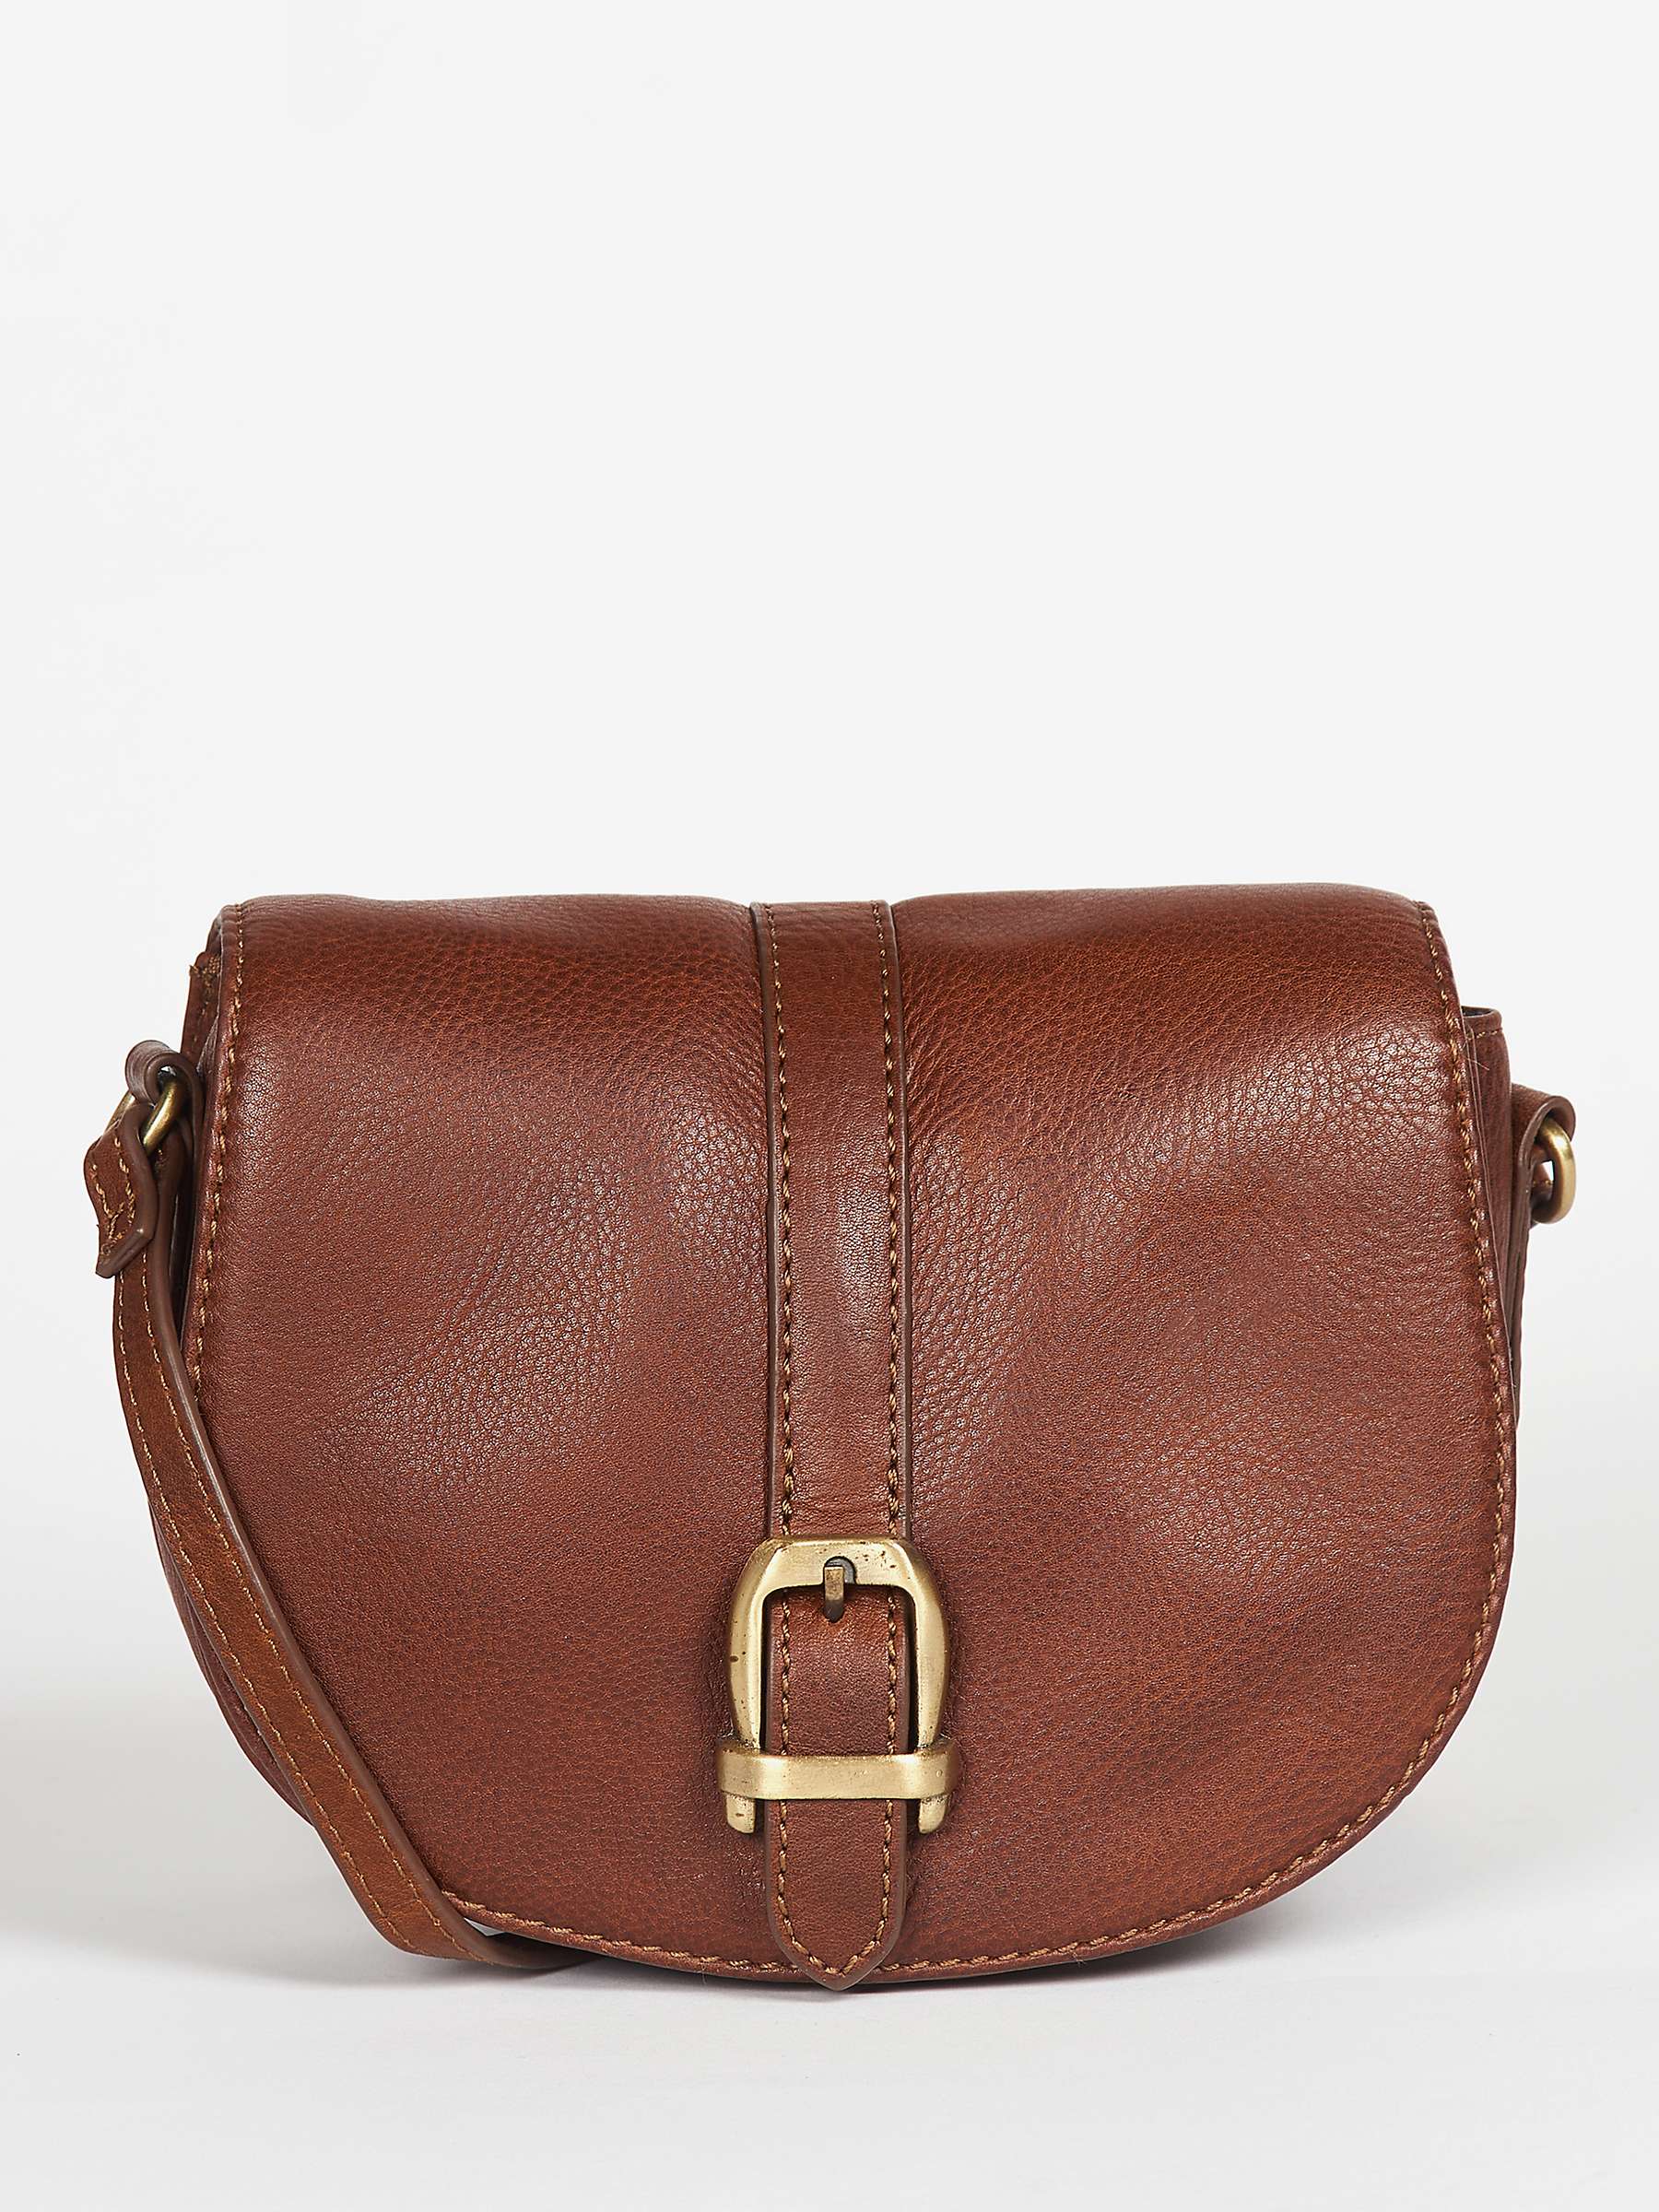 Buy Barbour Laire Leather Saddle Bag Online at johnlewis.com